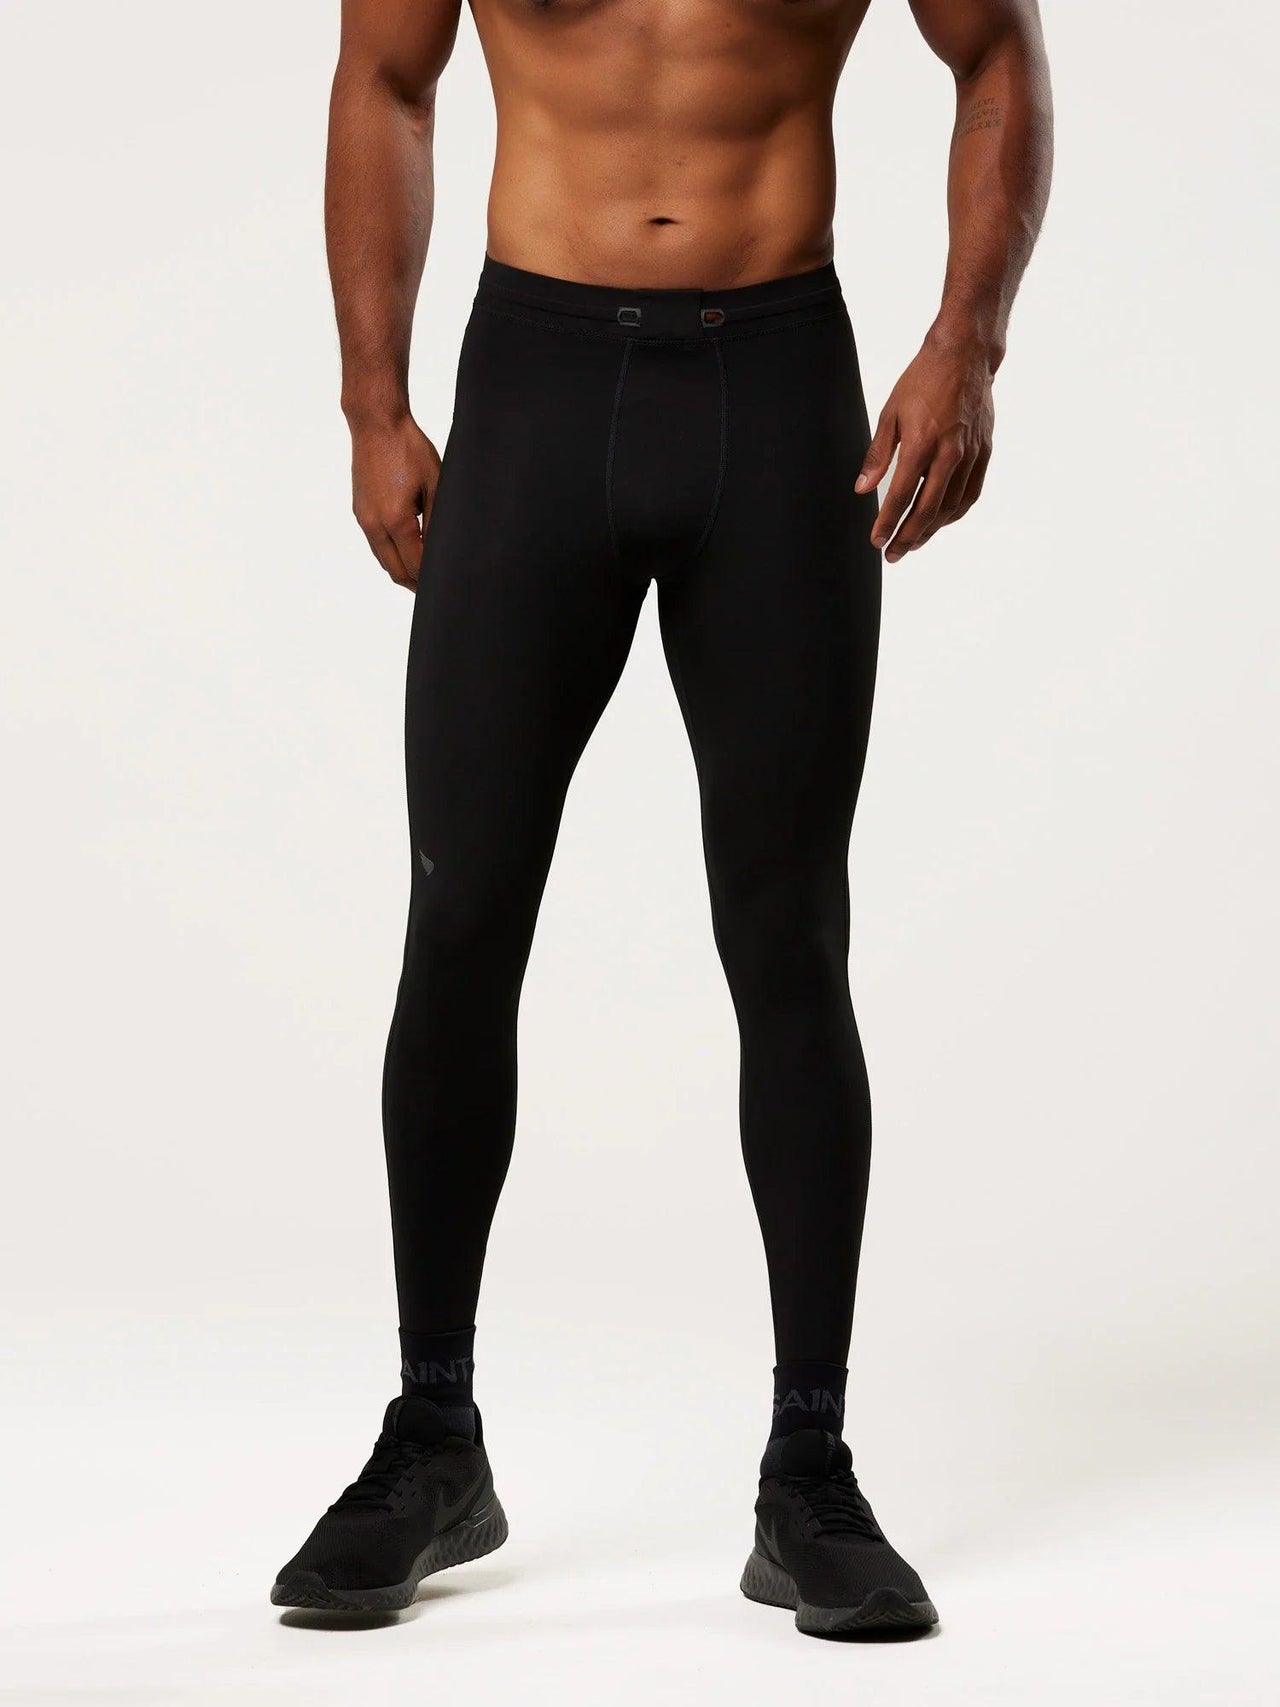 Men's Performance & Recovery Compression